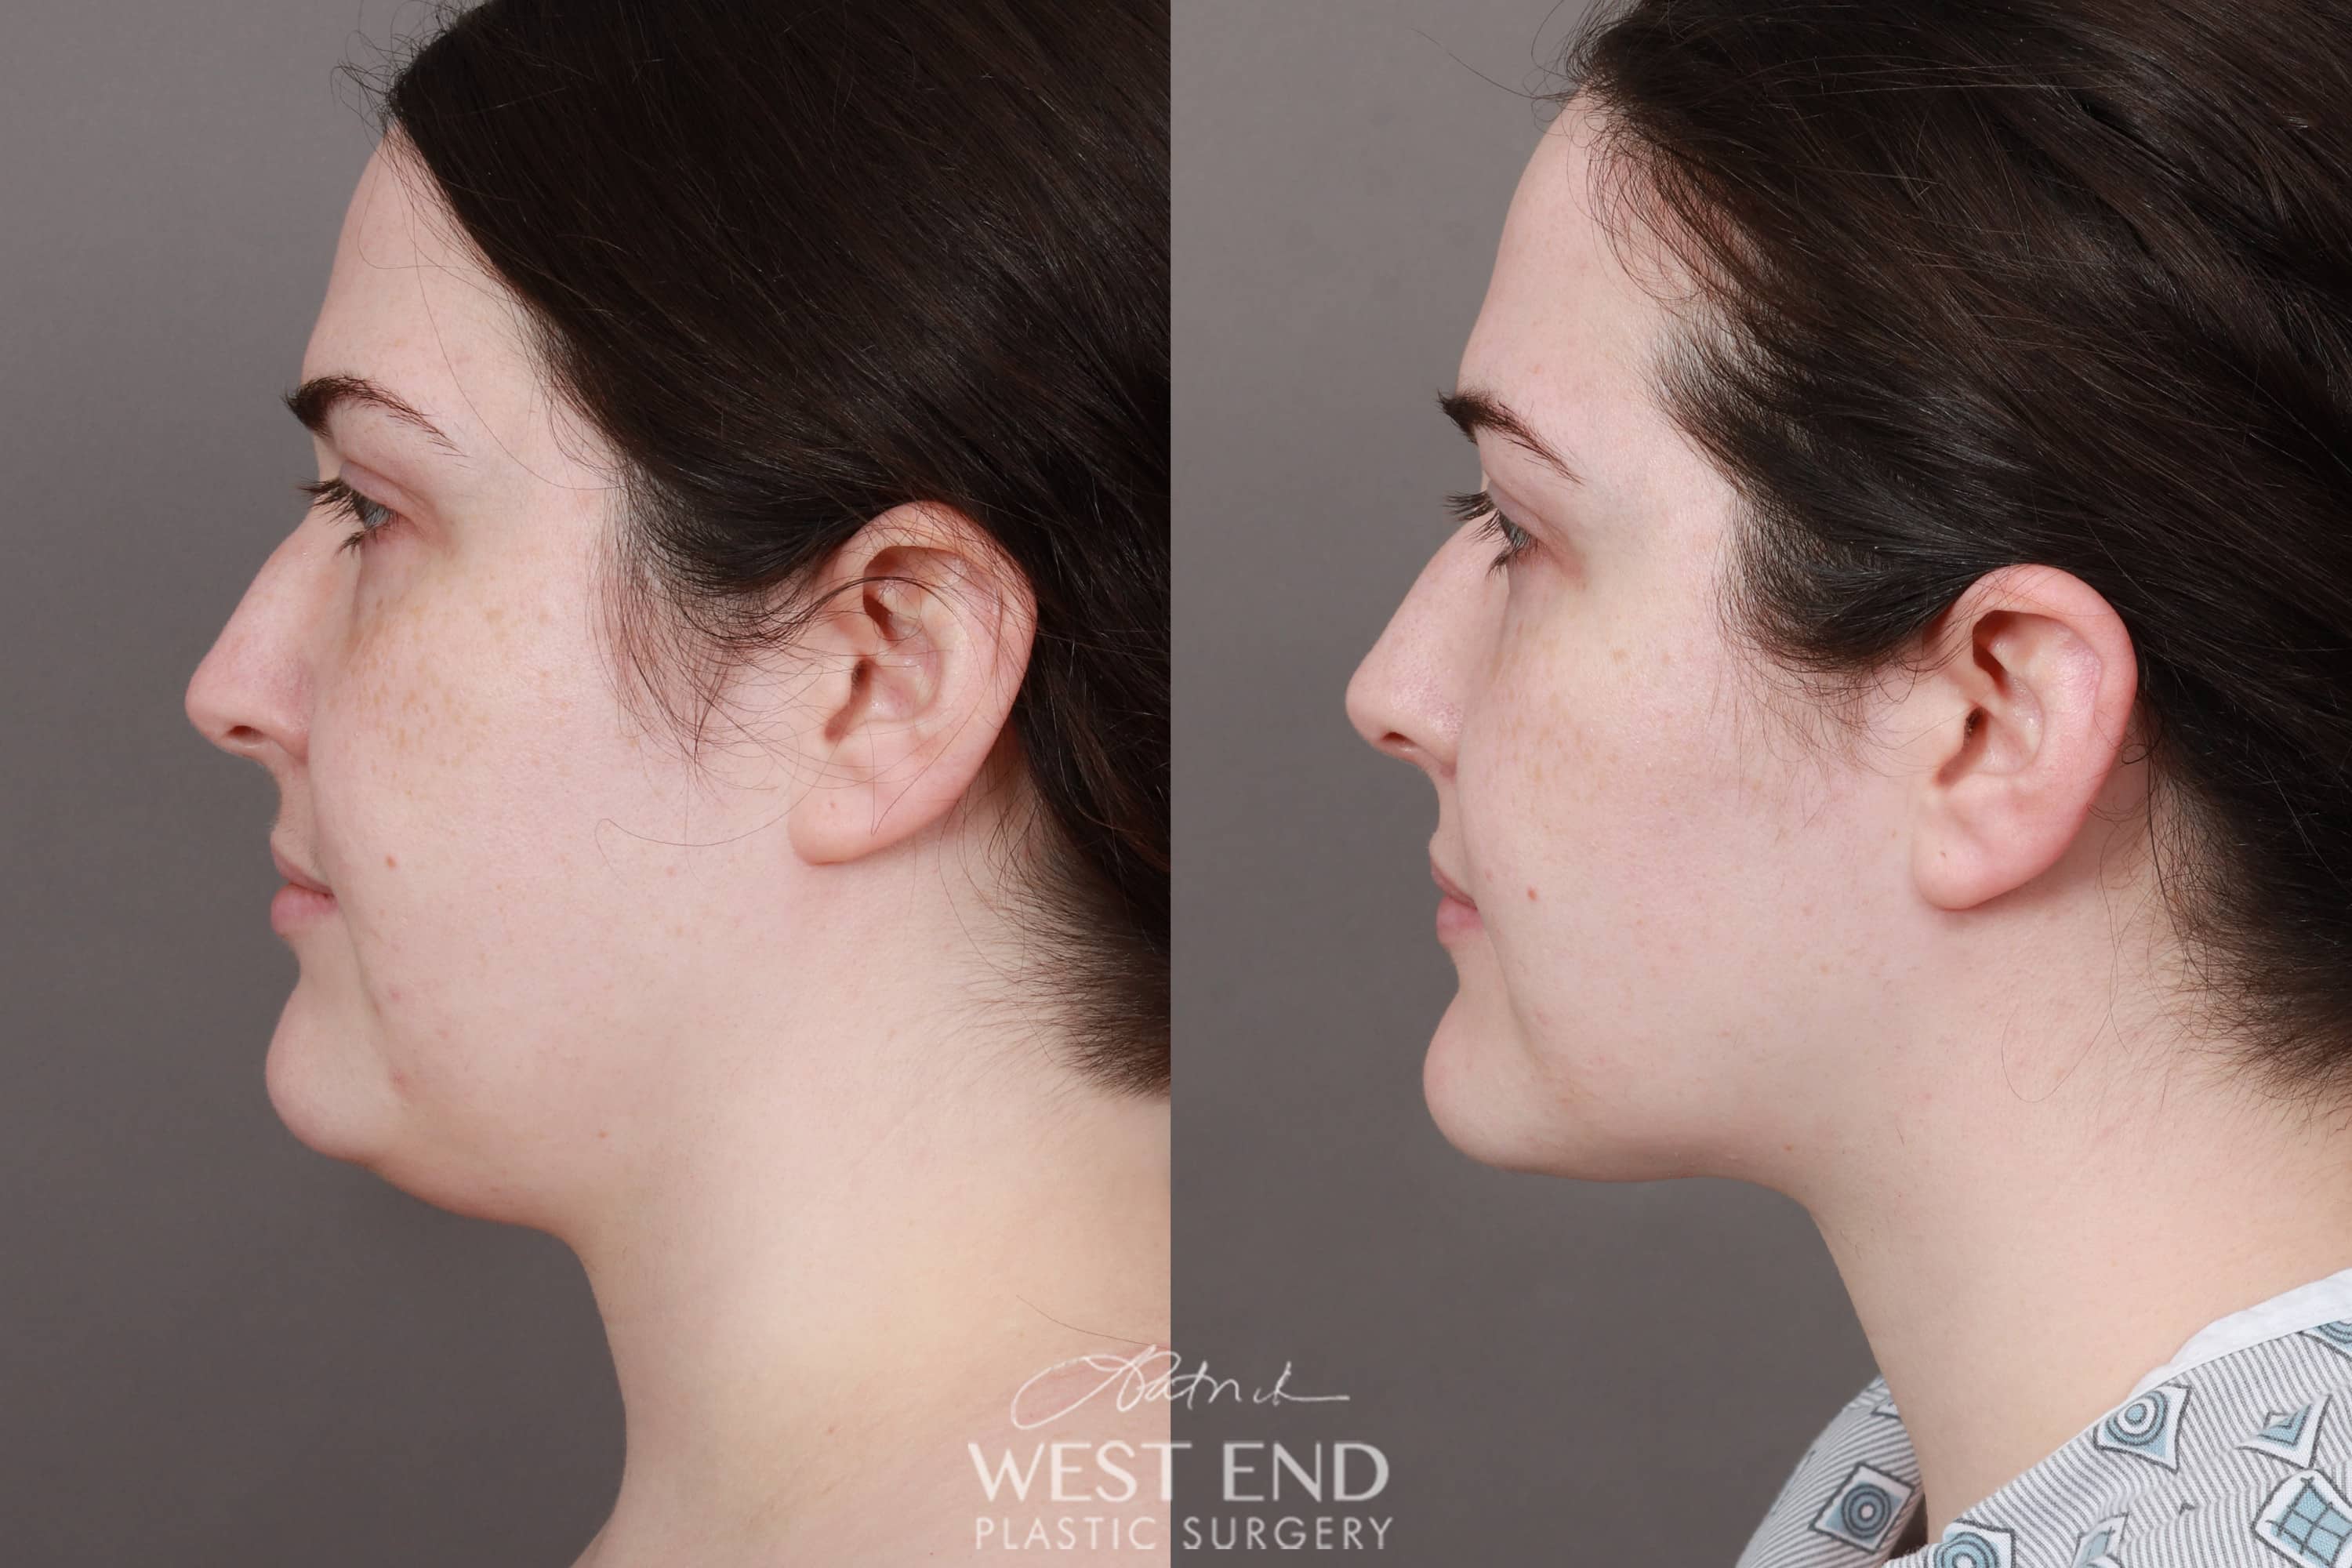 Liposuction of the Submental, Jawline, and Neck Region (3.5 Months Post-Op)